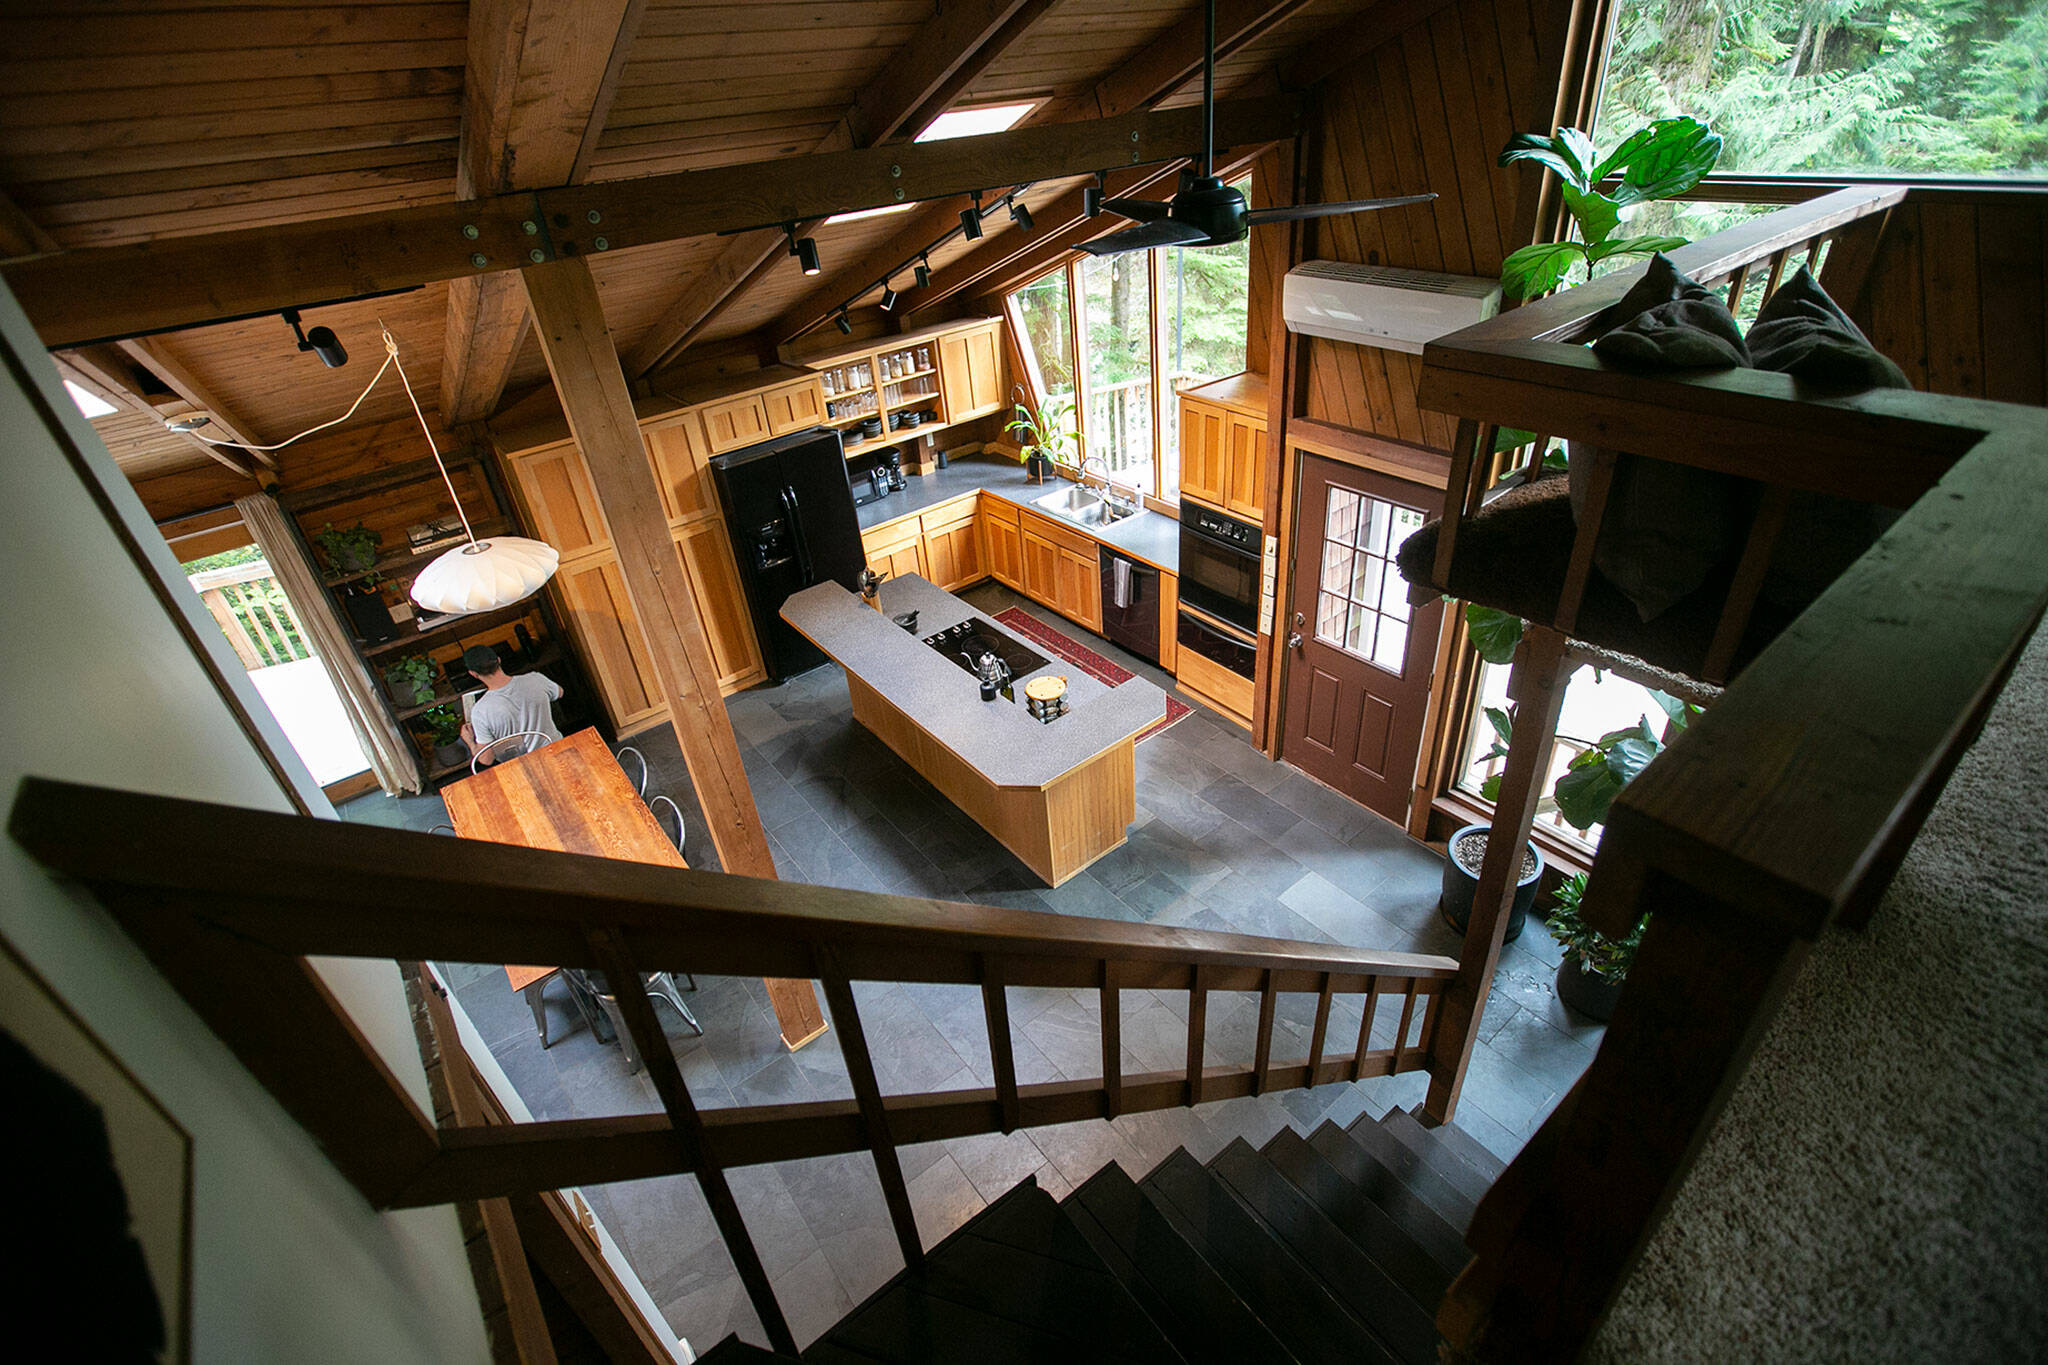 The view from the bedroom in cabin 1 overlooks the galley.  (Ryan Berry / The Herald)